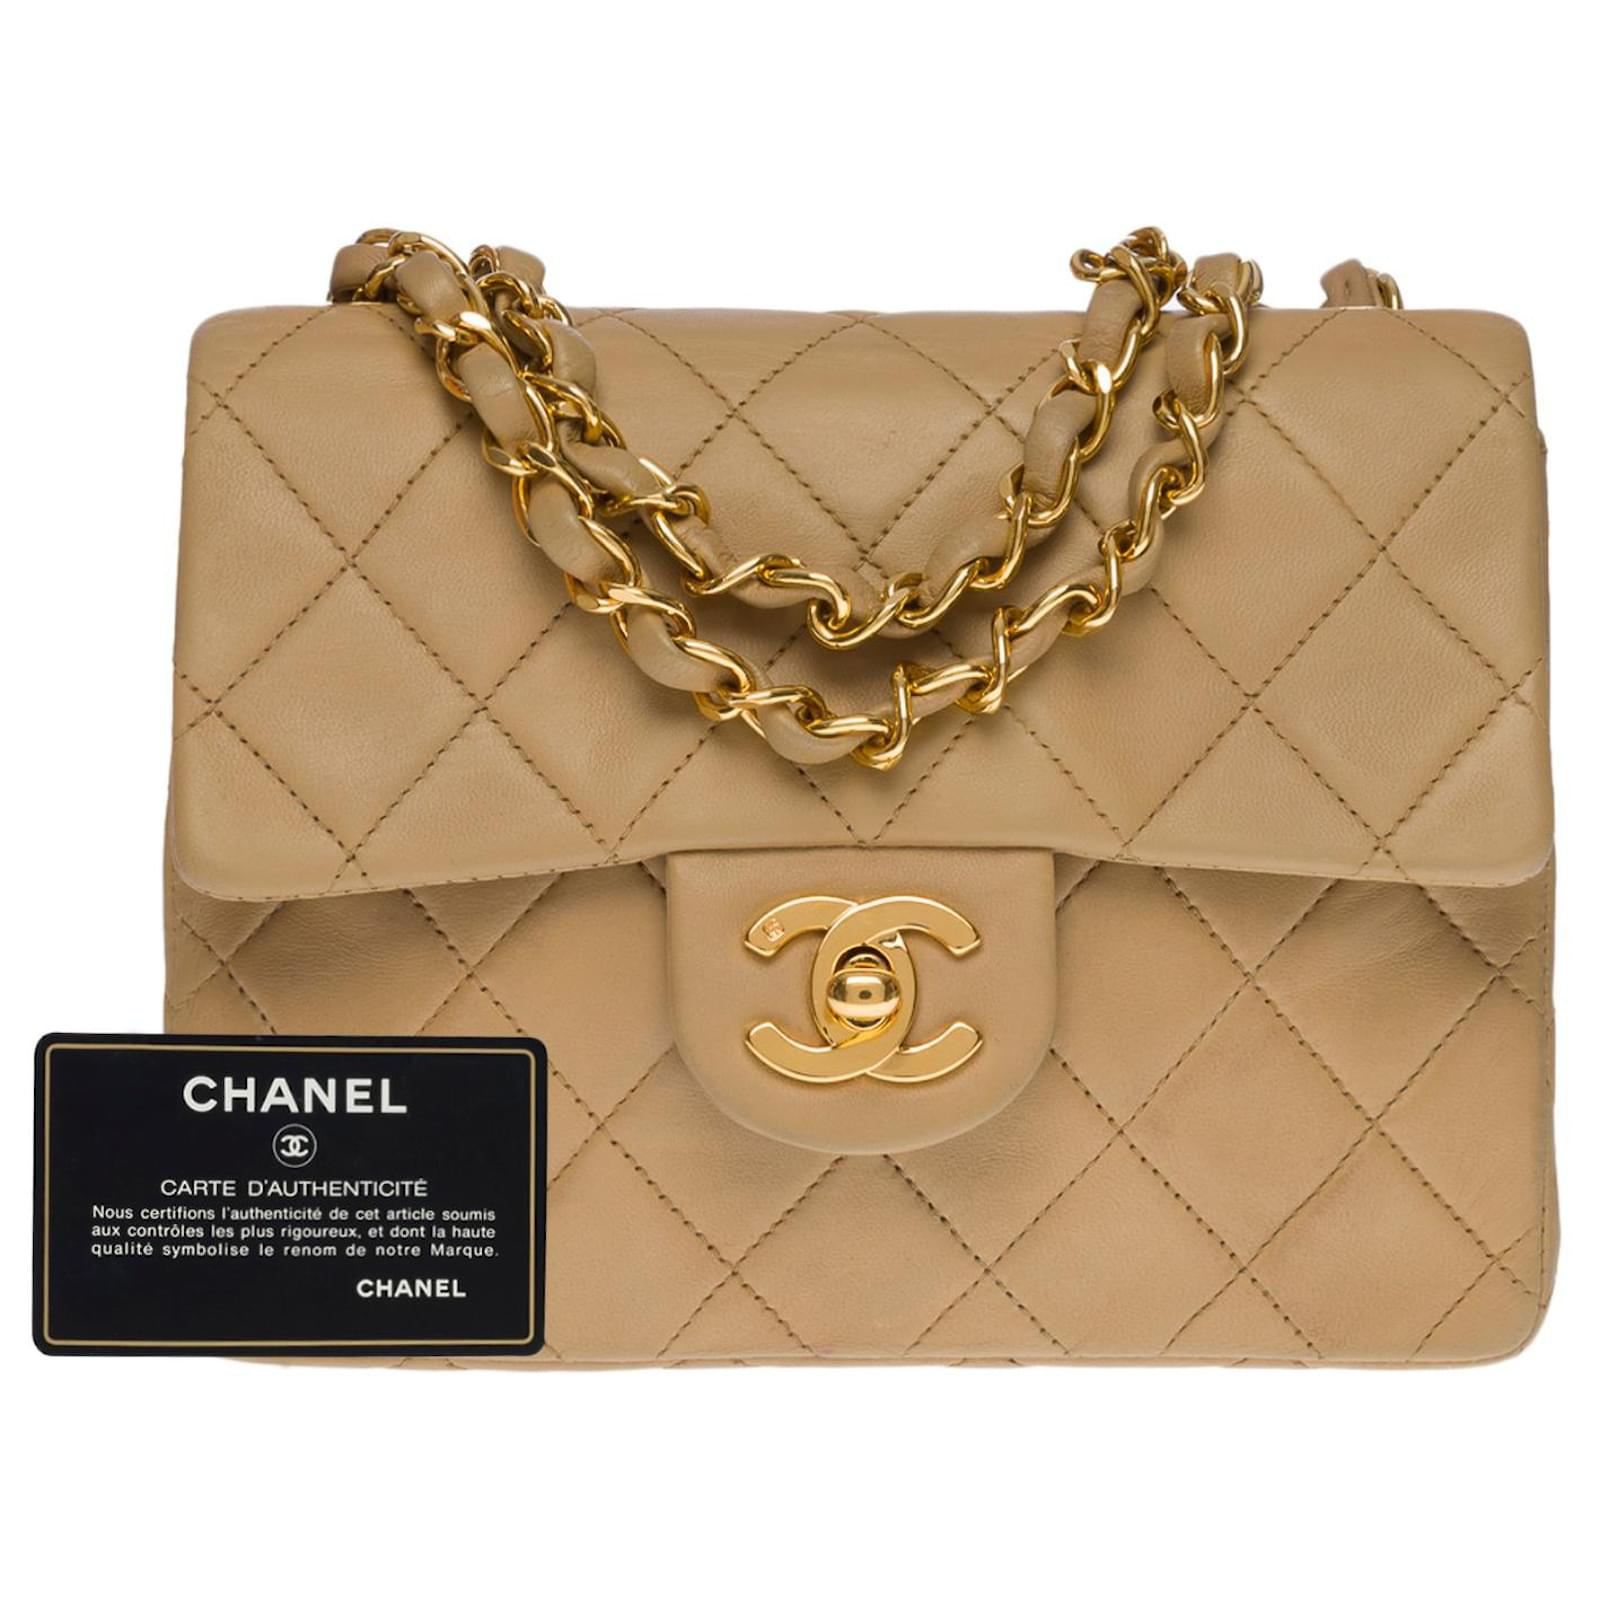 Chanel Beige Quilted Lambskin Leather Jumbo Classic Double Flap Bag Chanel